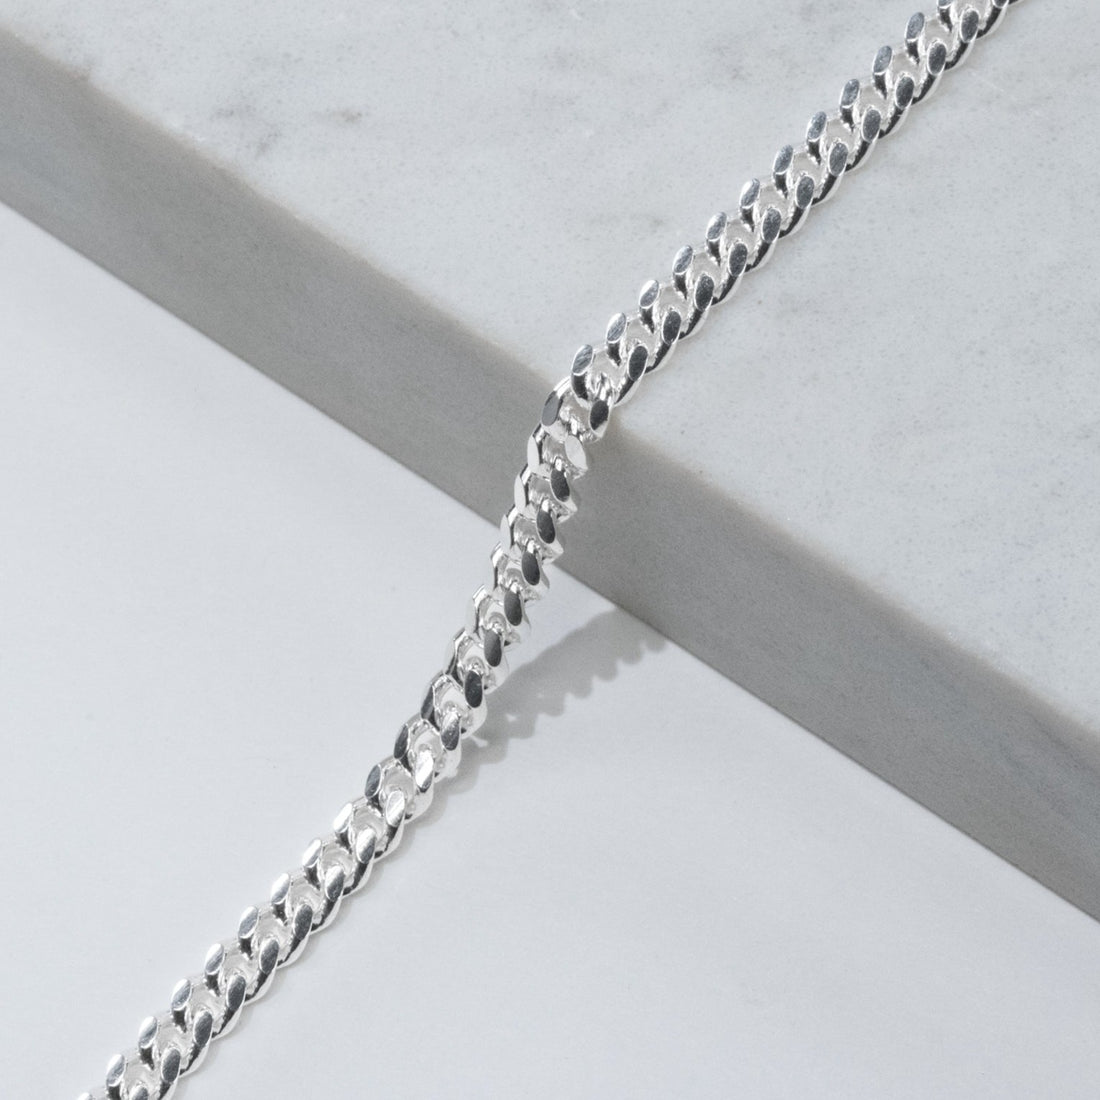 Sterling Silver Cuban Chain - 3.8mm